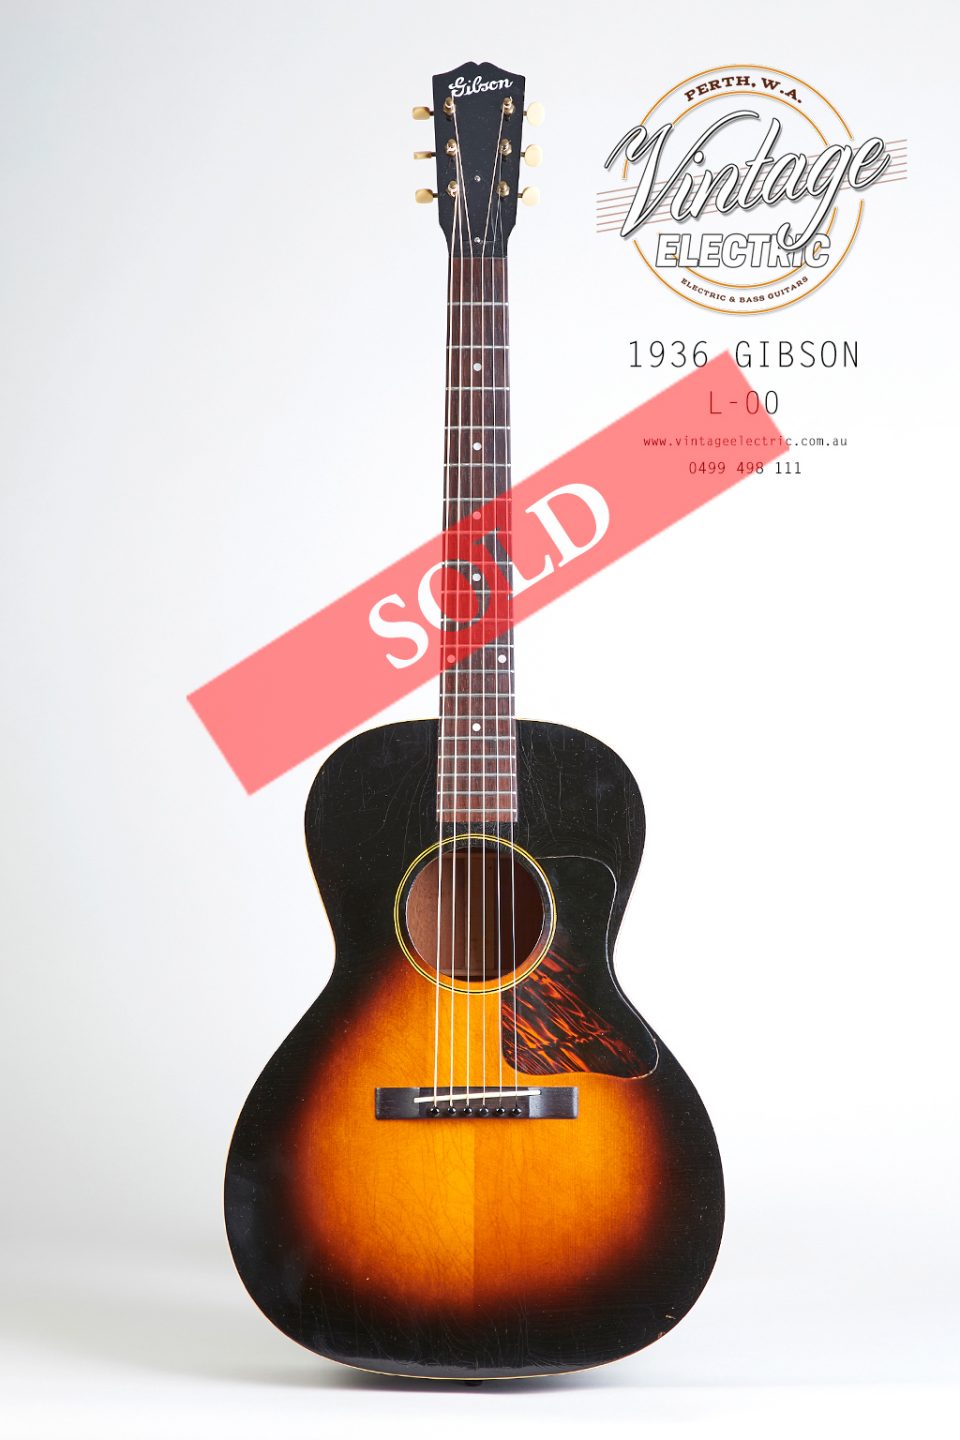 1936 Gibson L-00 SOLD